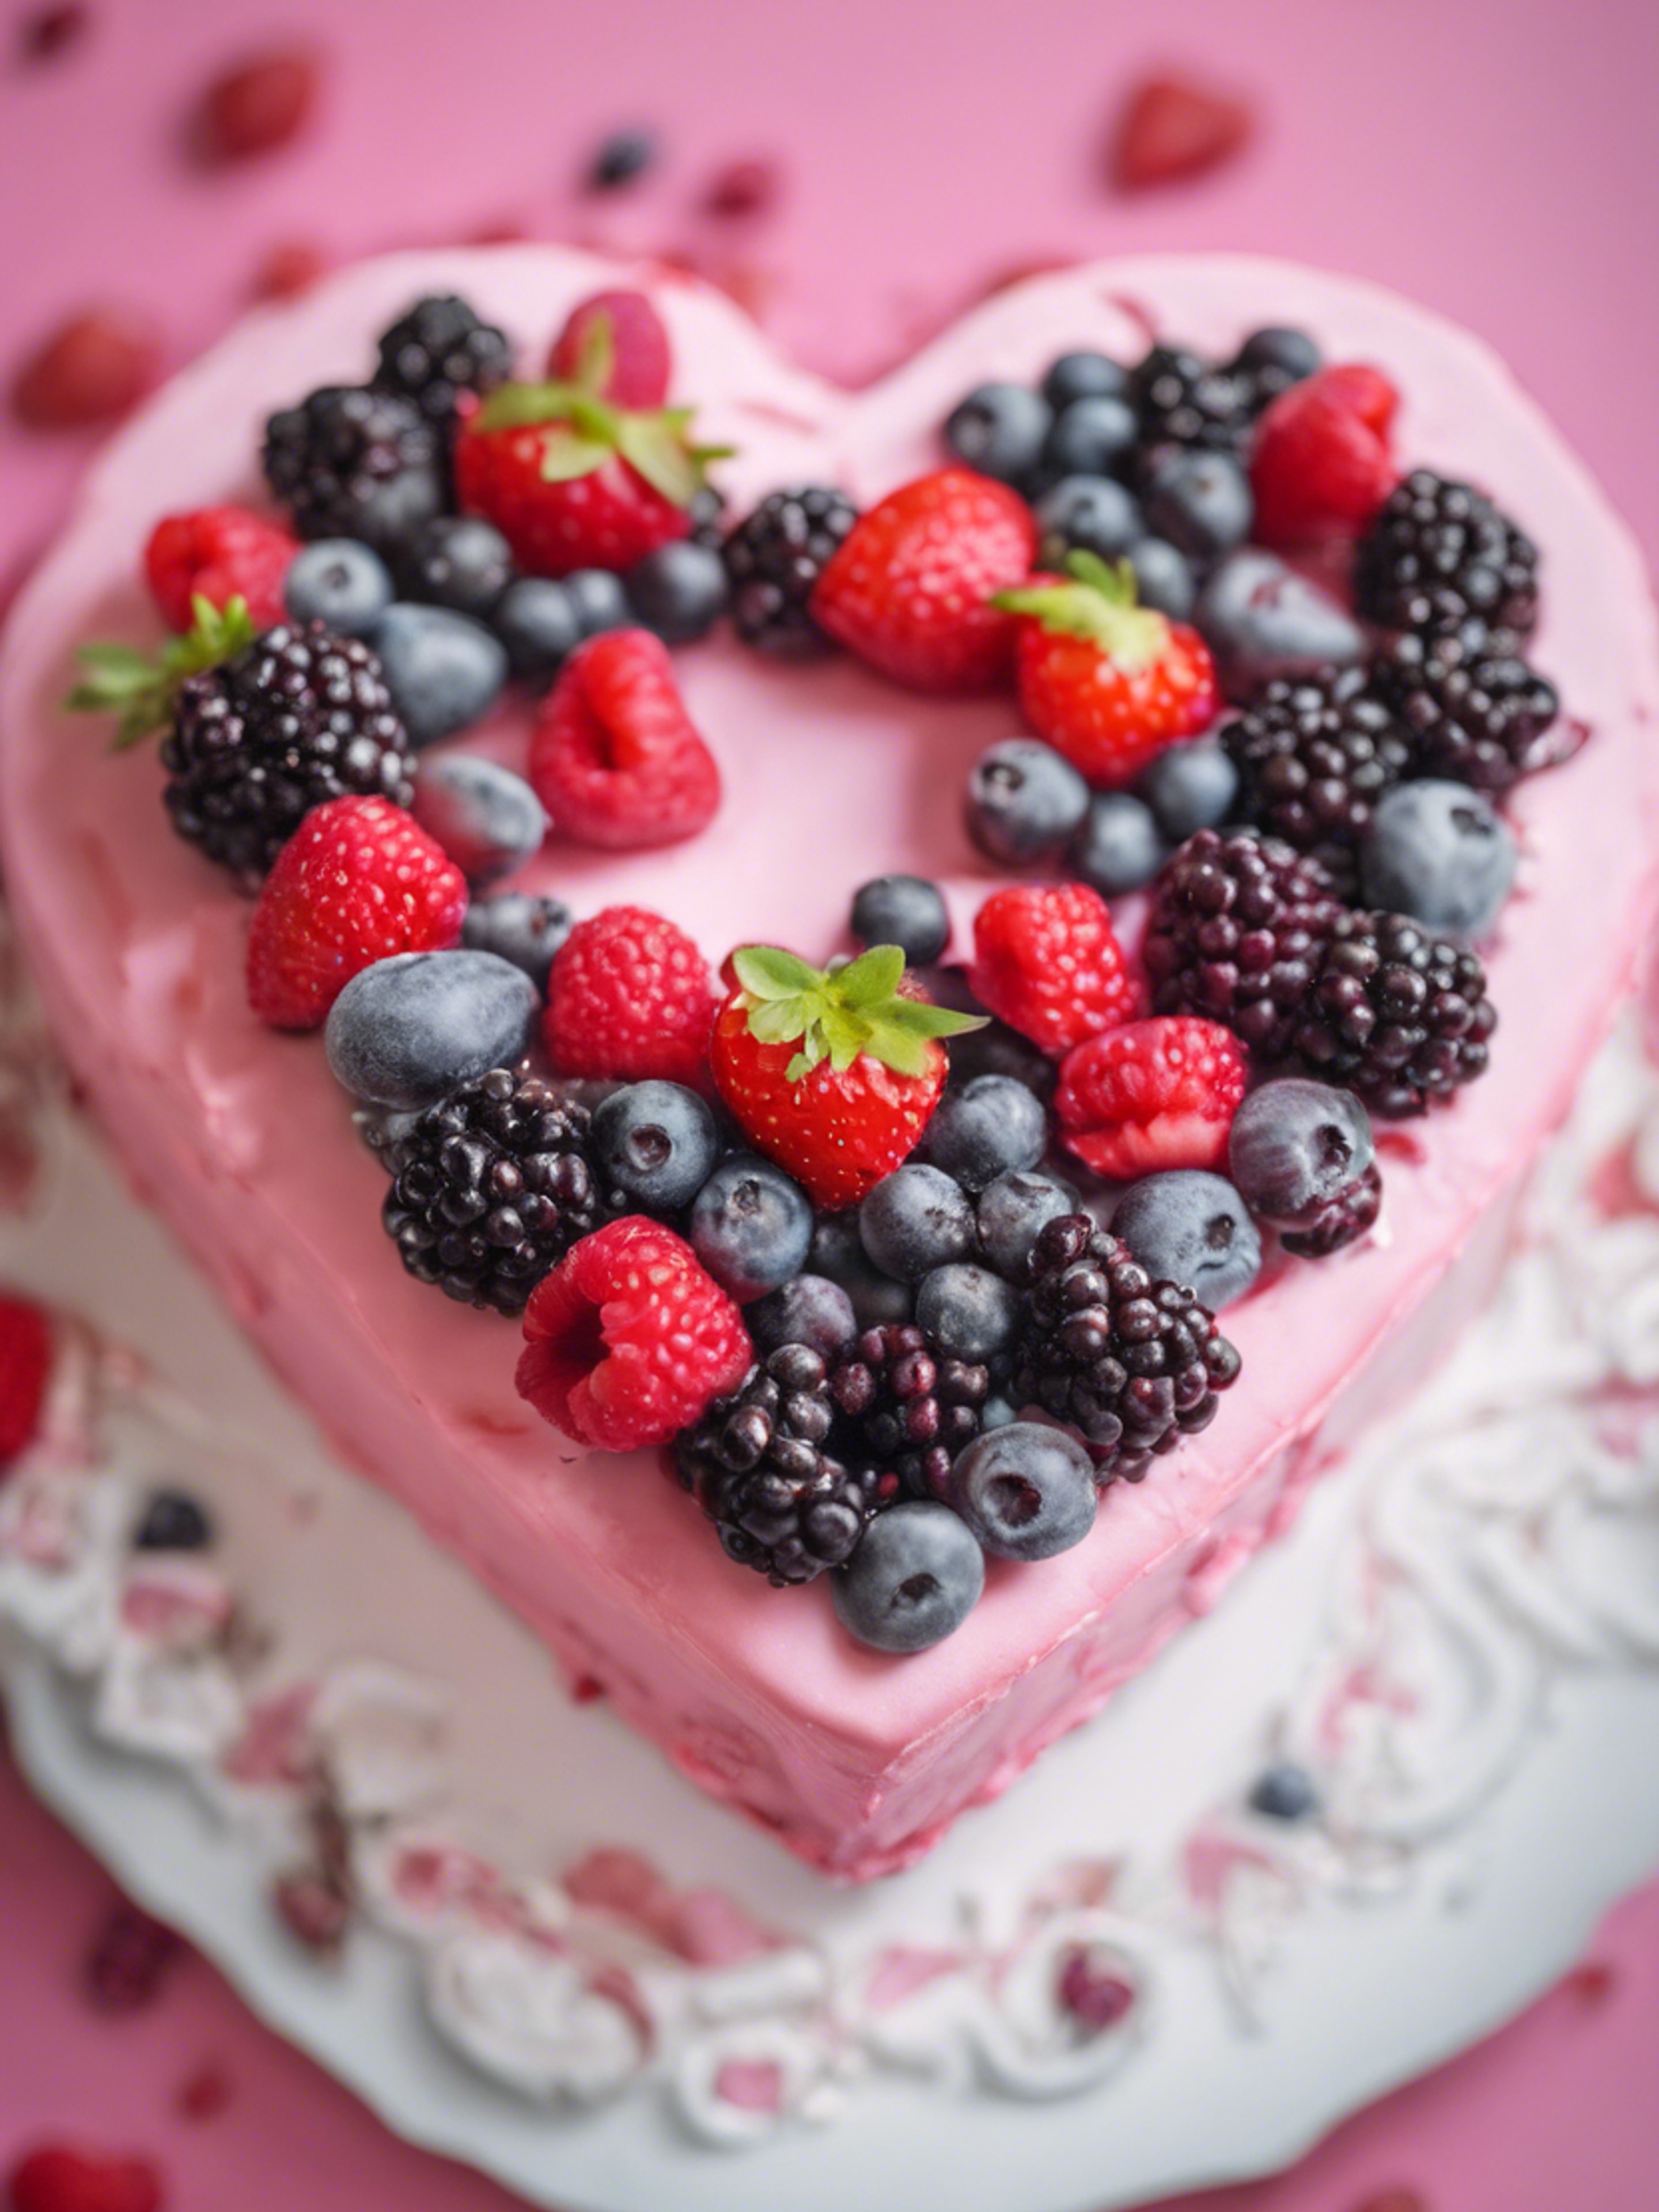 A pink heart shaped cake topped with assorted berries. Papel de parede[c4a6a00ea89247258077]